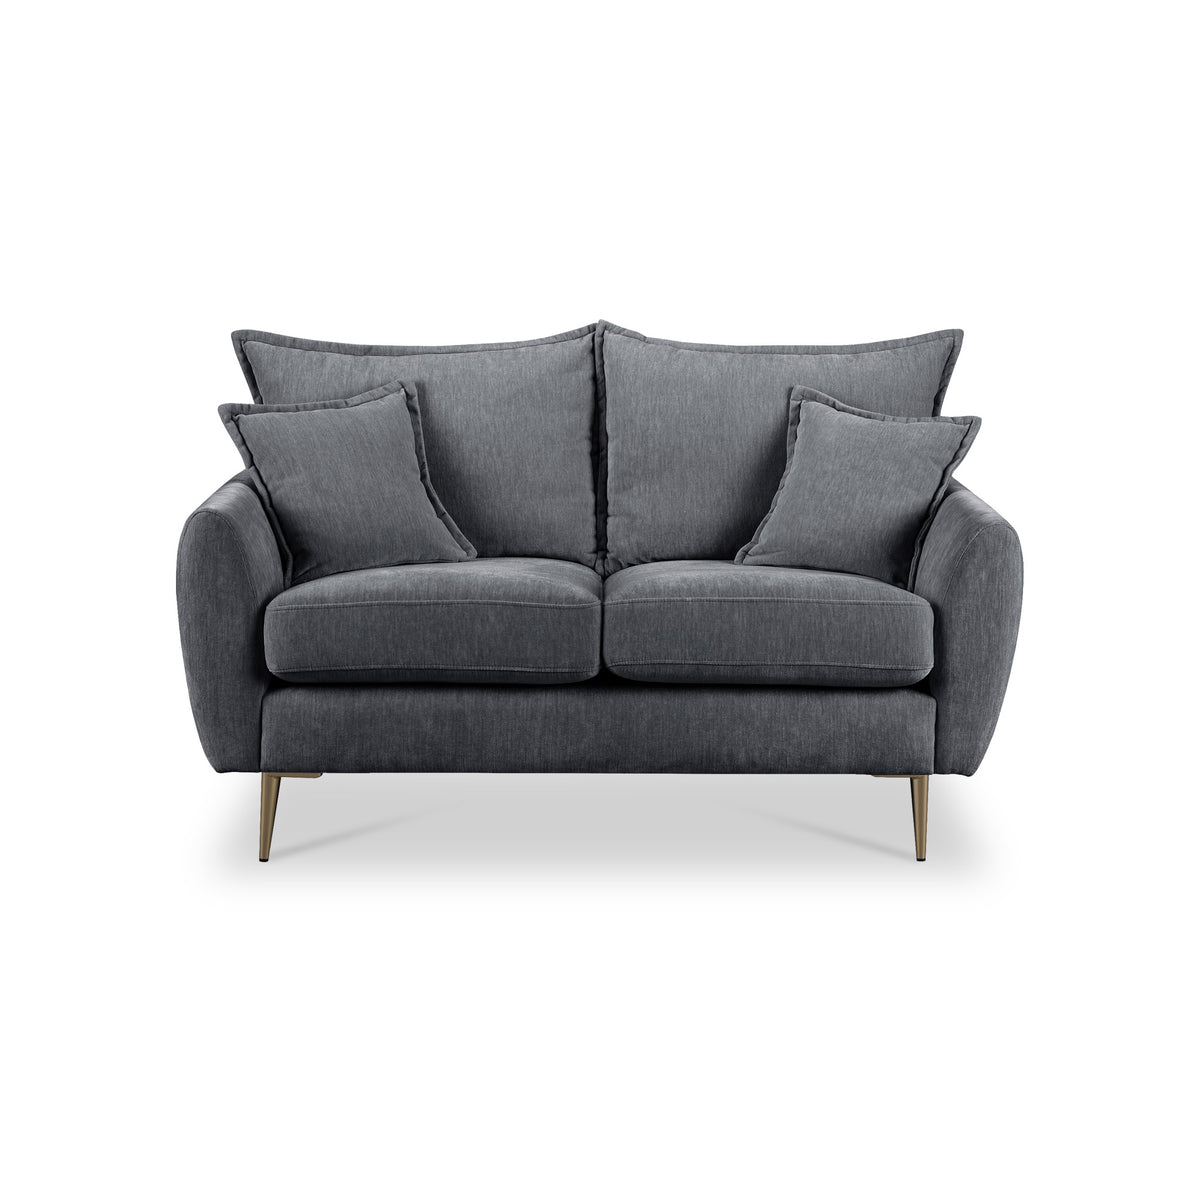 Evelyn Charcoal Grey 2 Seater Sofa from Roseland Furniture